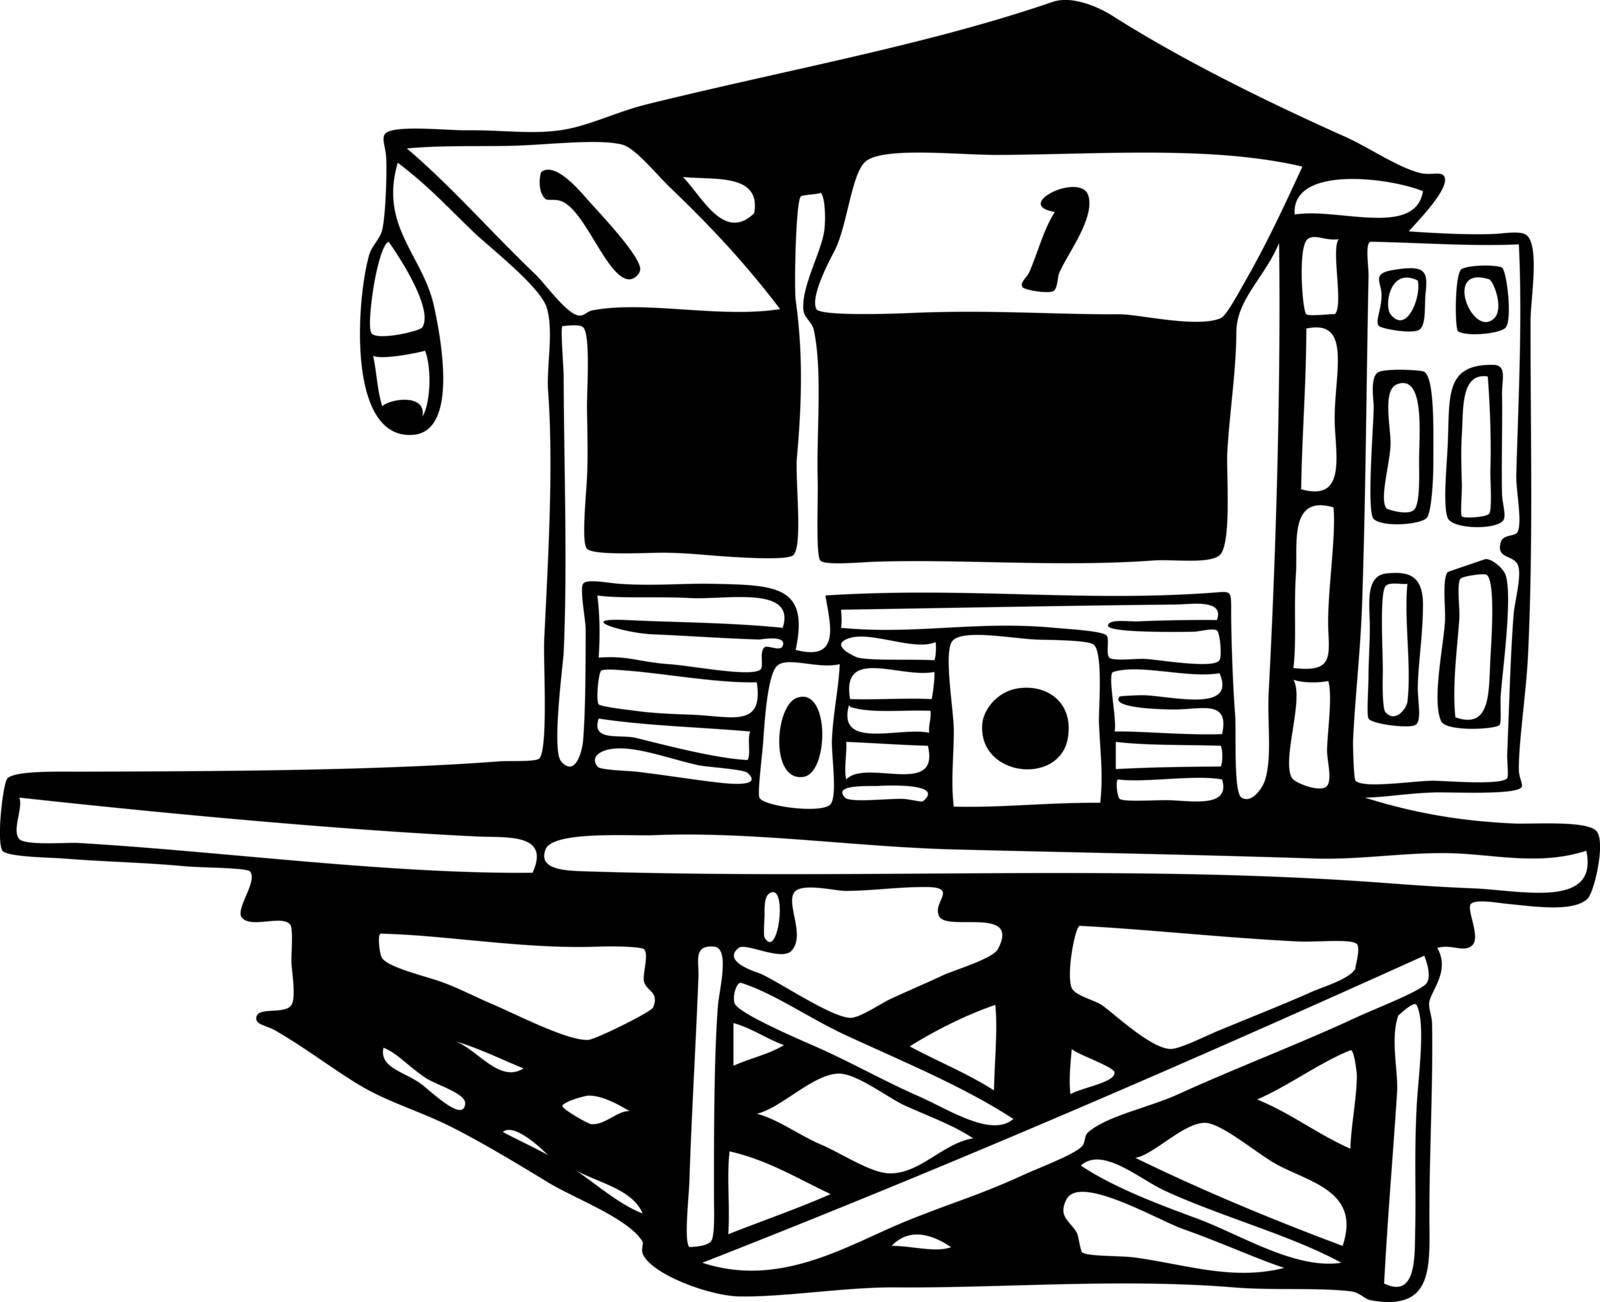 Hand drawn image of a lifeguard tower.